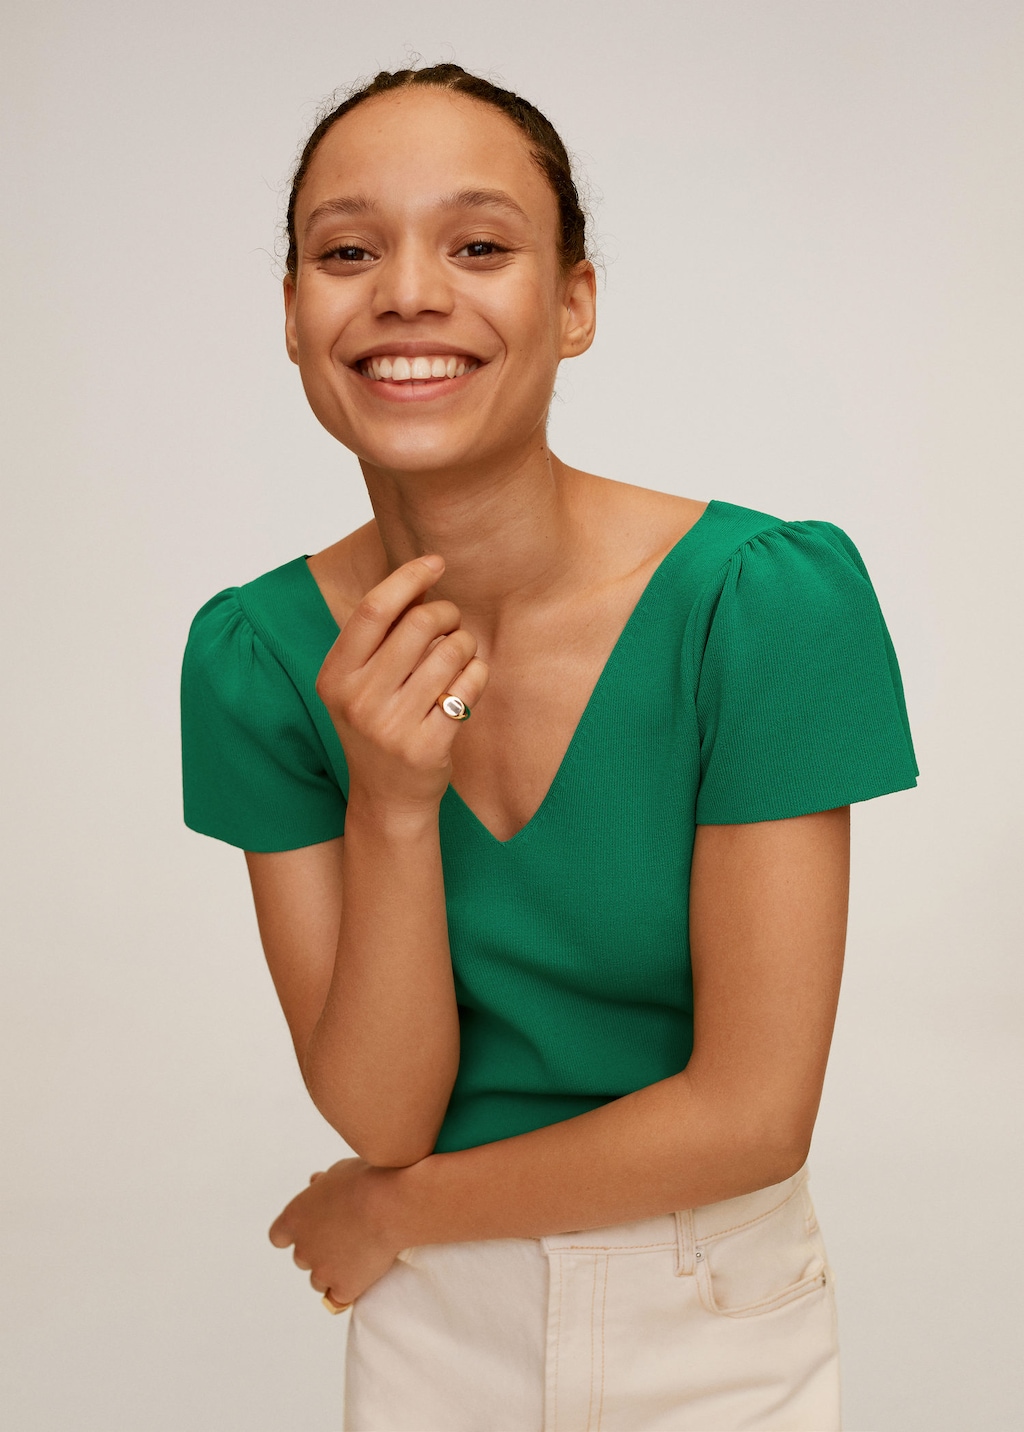 Woman smiling, wearing bright green blouse